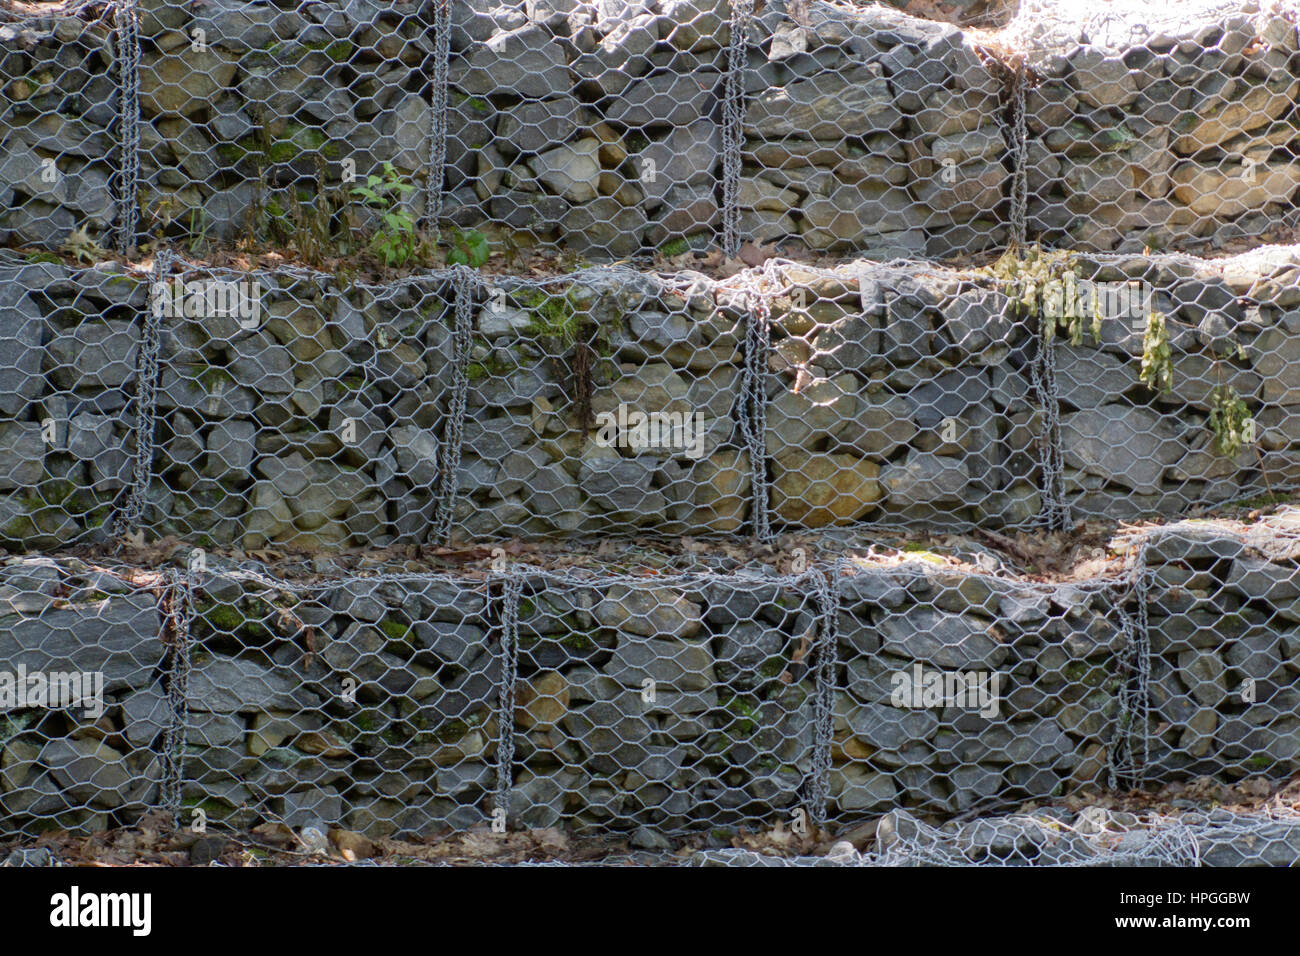 Tiers of screened in Gabion riprap (rock) line a stream to control river bank erosion and flooding Stock Photo